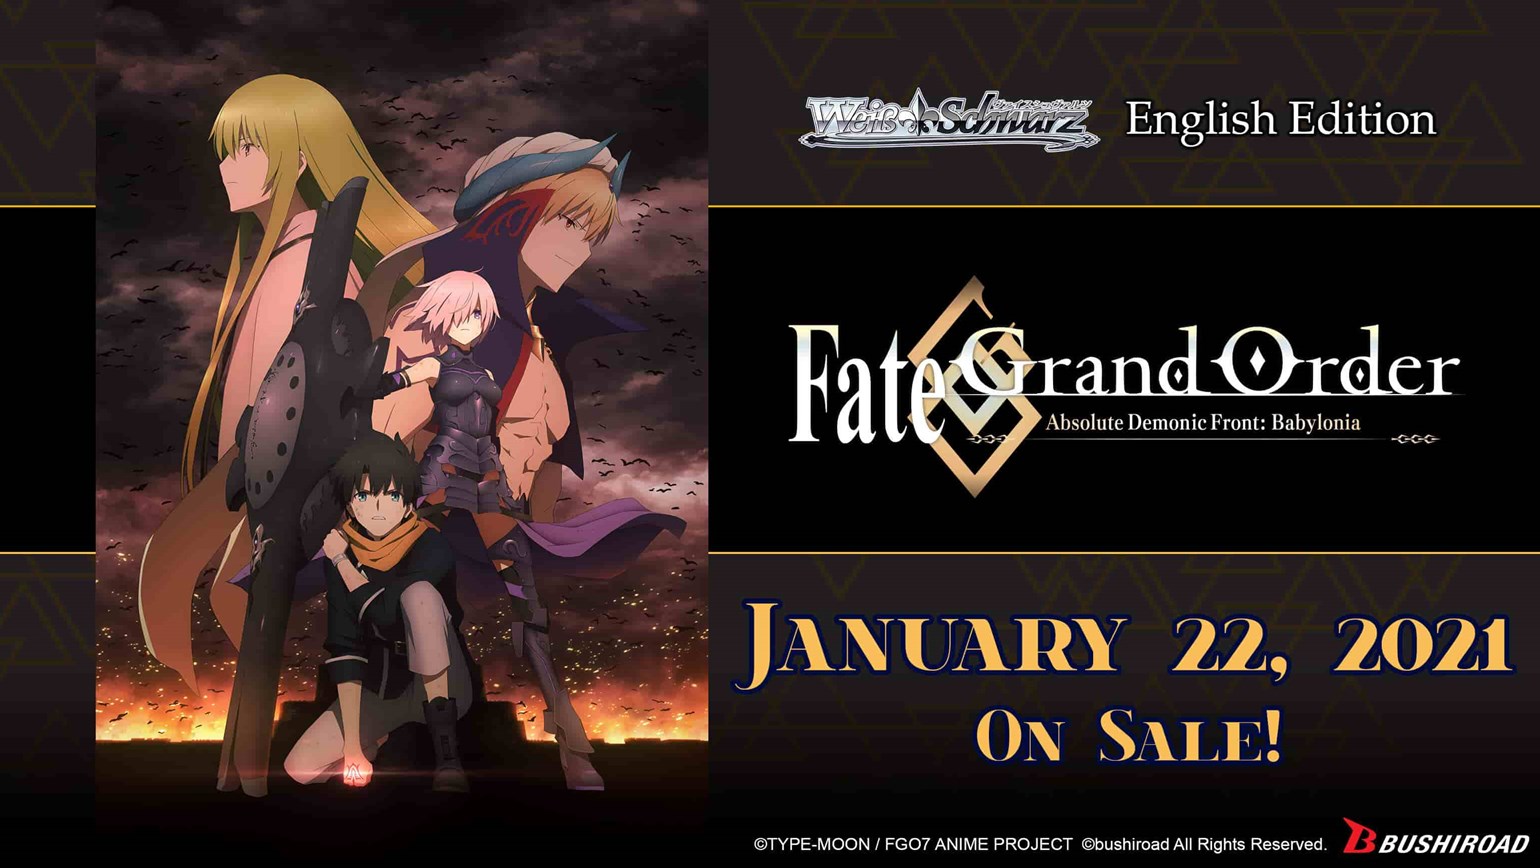 Weiss Schwarz: Fate/Grand Order Absolute Demonic Front: Babylonia Hits Stores January 22nd!